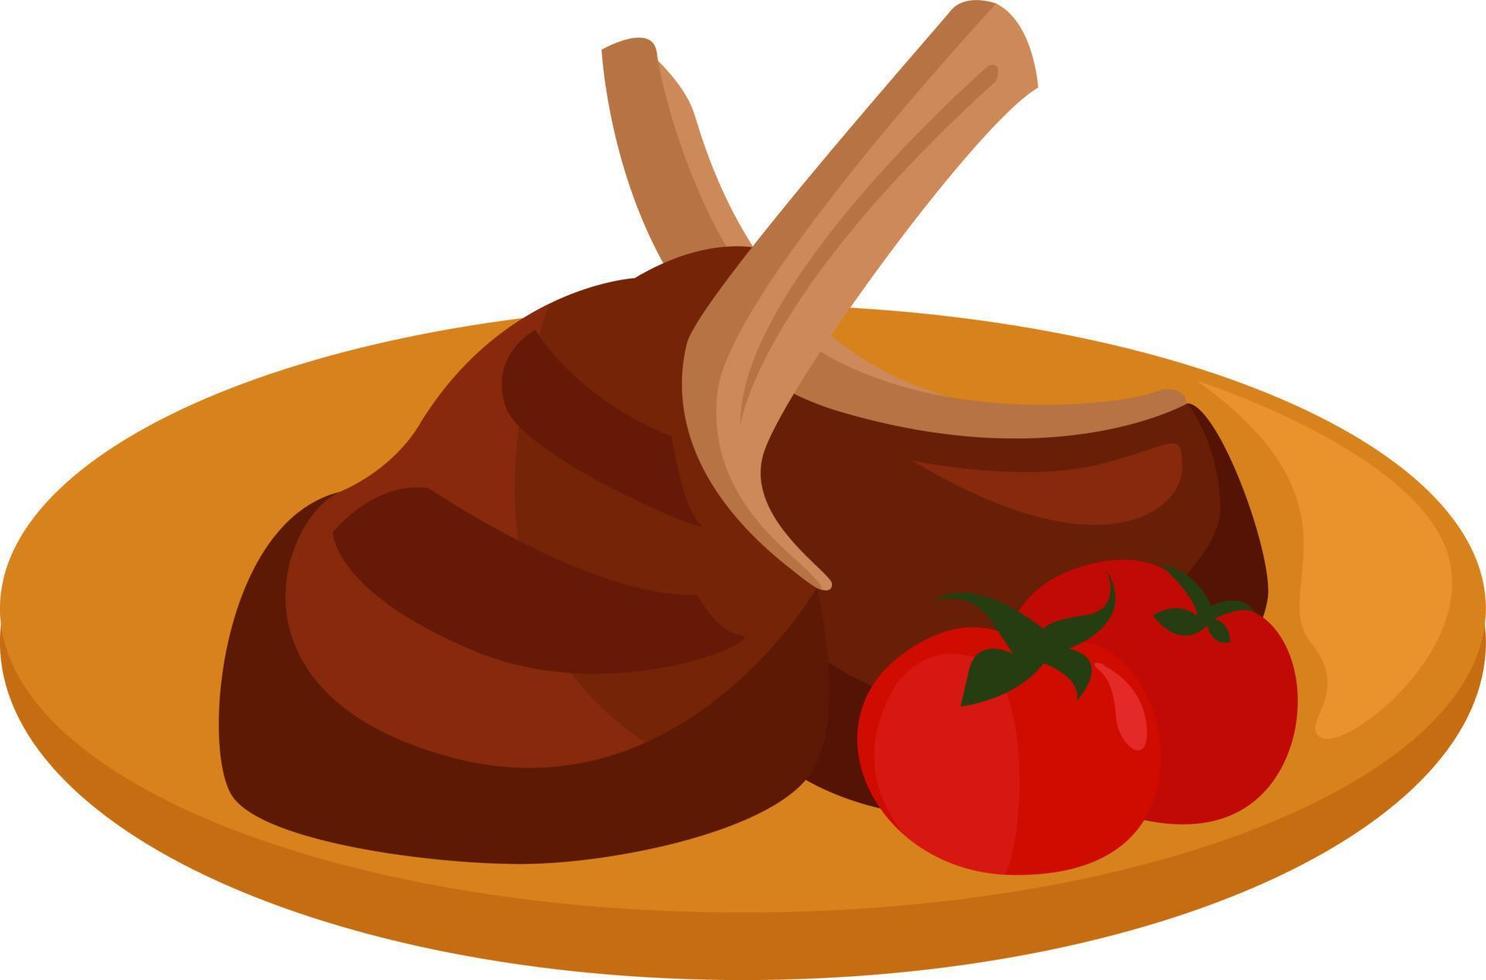 Lamb ribs with tomatoes, illustration, vector on white background